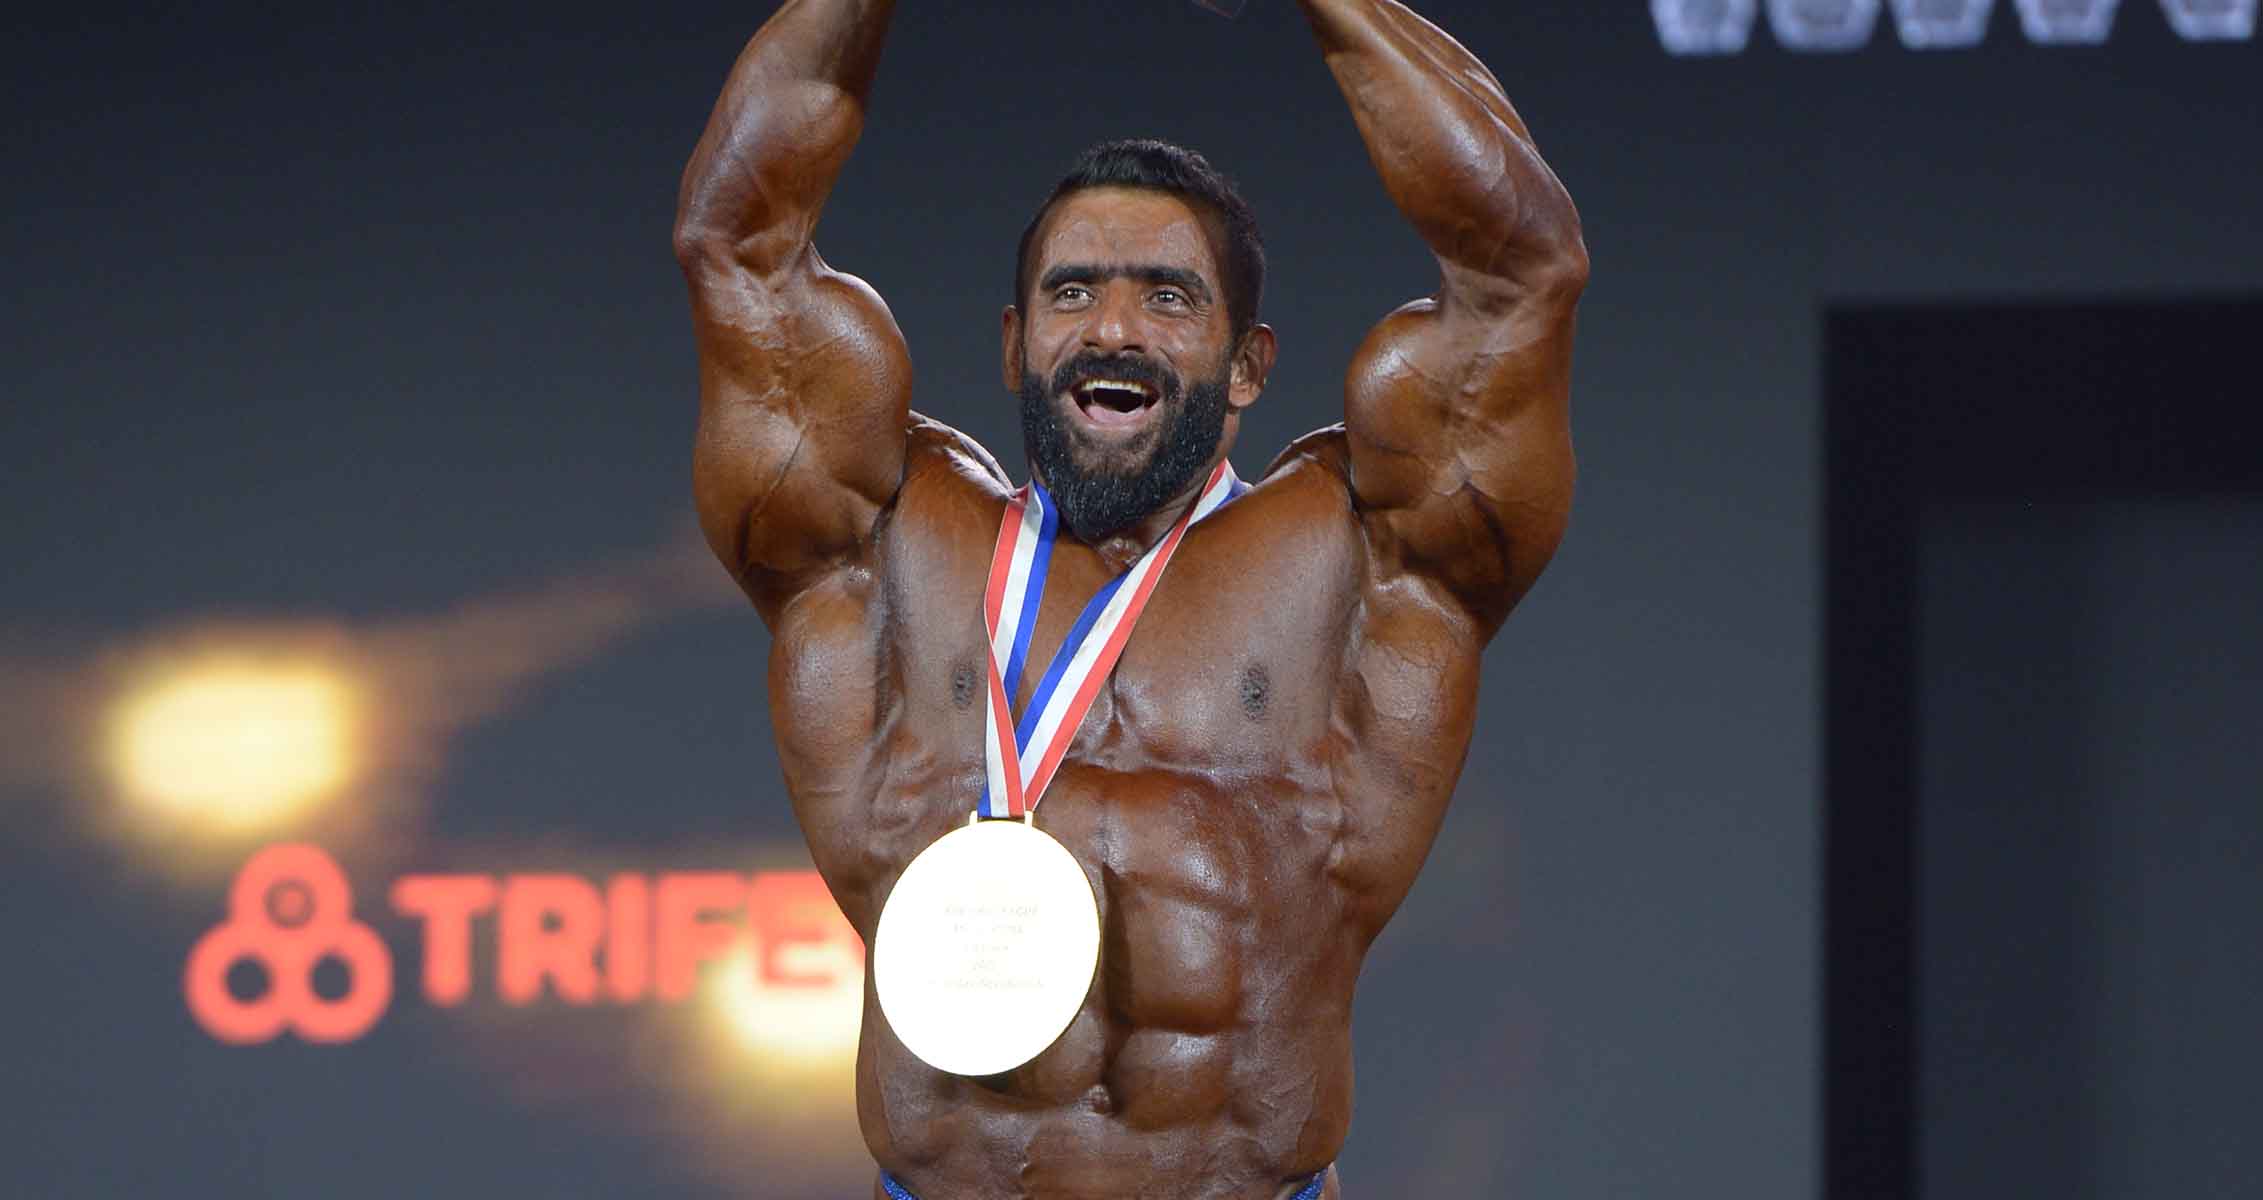 Akbar Khazaei: Hadi Choopan's first place in Mr. Olympia Competition proved  the complete accomplishment of justice in IFBB PRO - Sheru Classic world